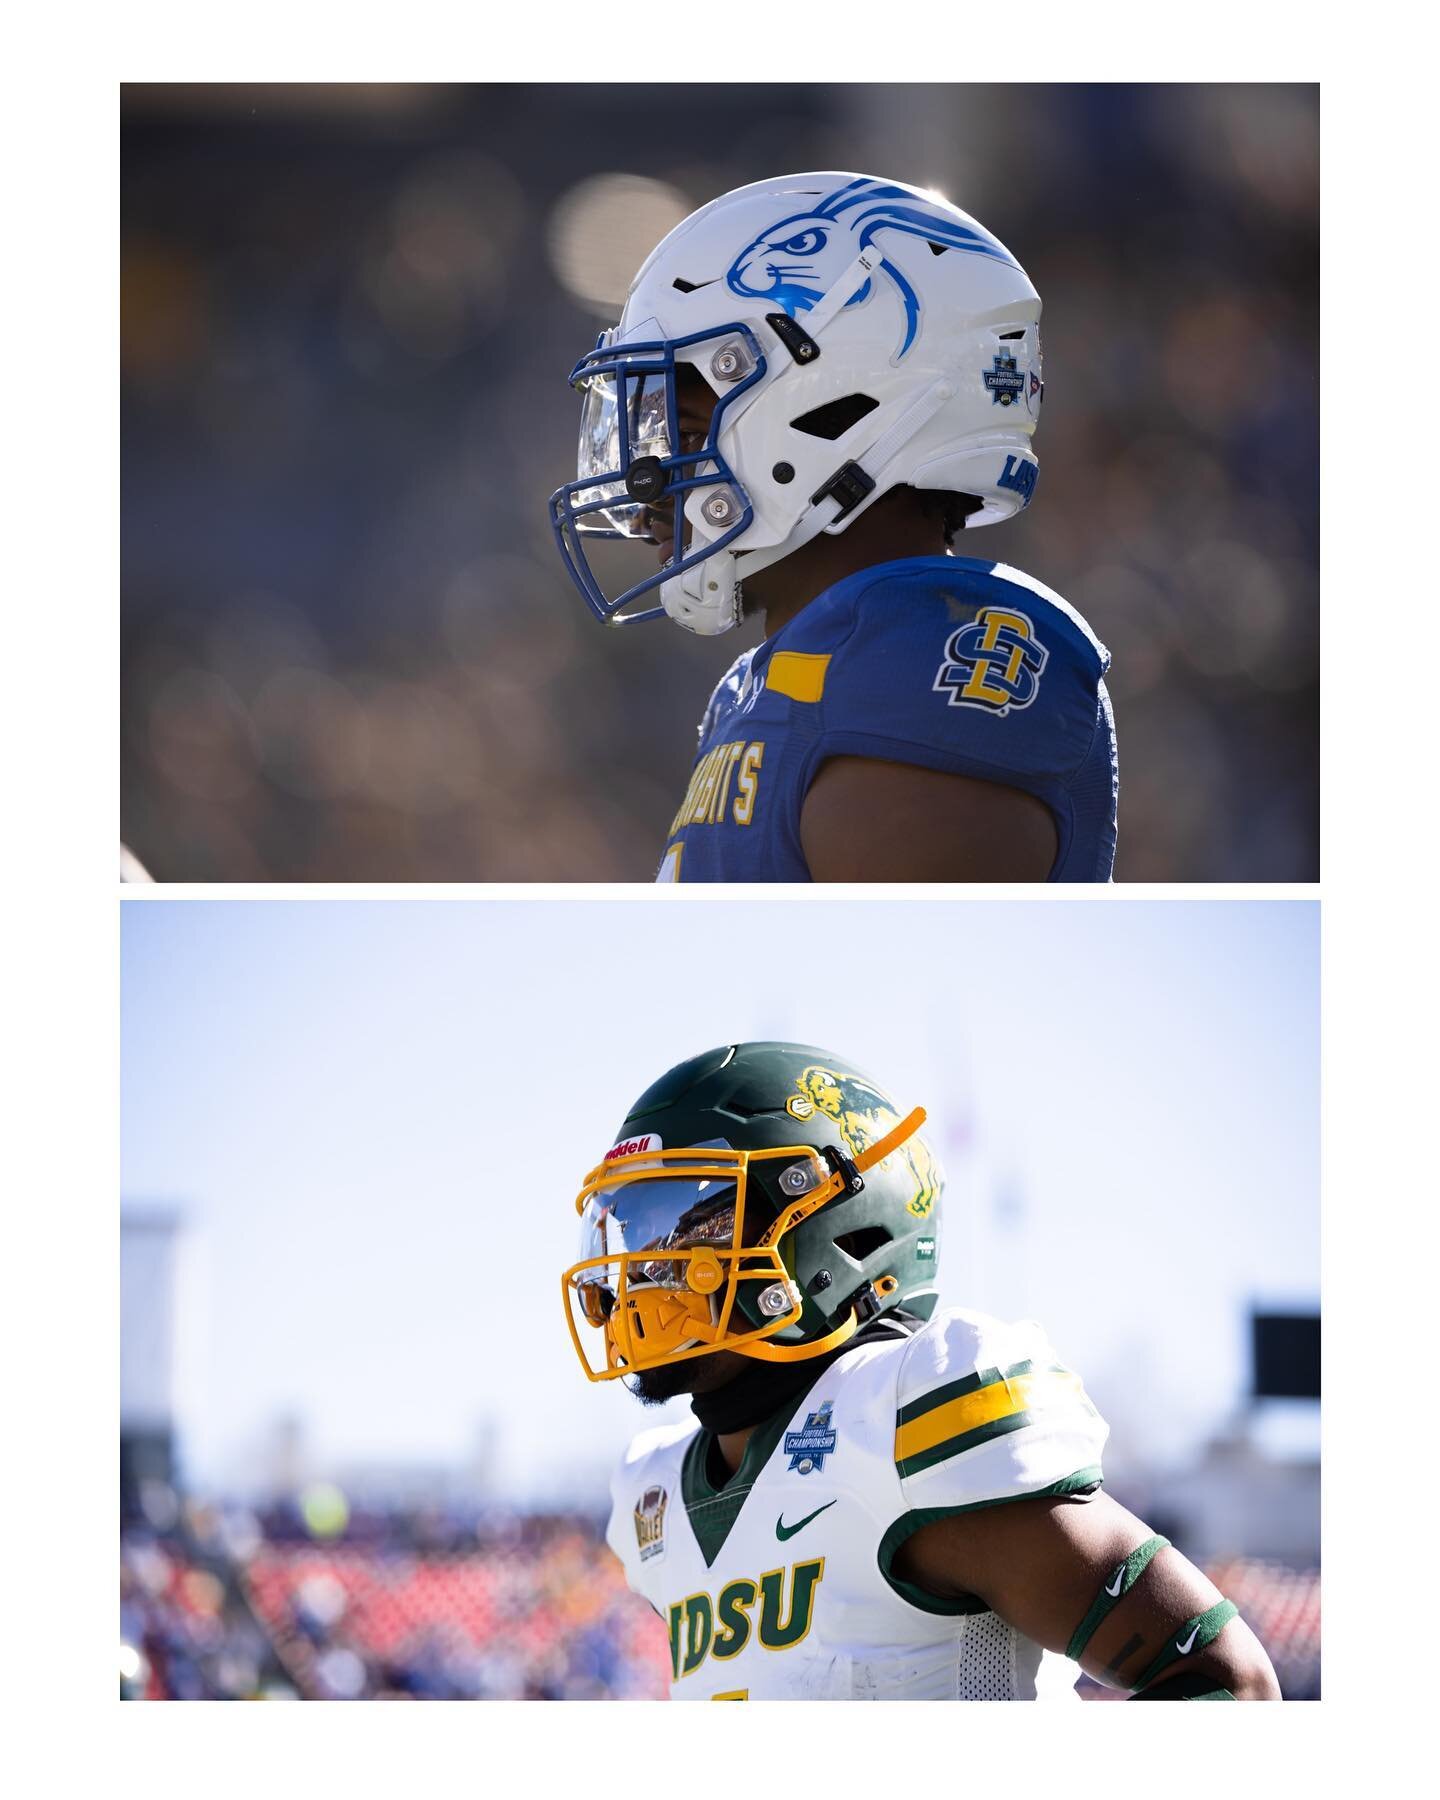 A few more images from South Dakota States win over North Dakota state in the 2023 FCS National Championship at Toyota Stadium in Frisco, TX.
&bull;
[Hunter D. Cone // Zuma Press Photo]